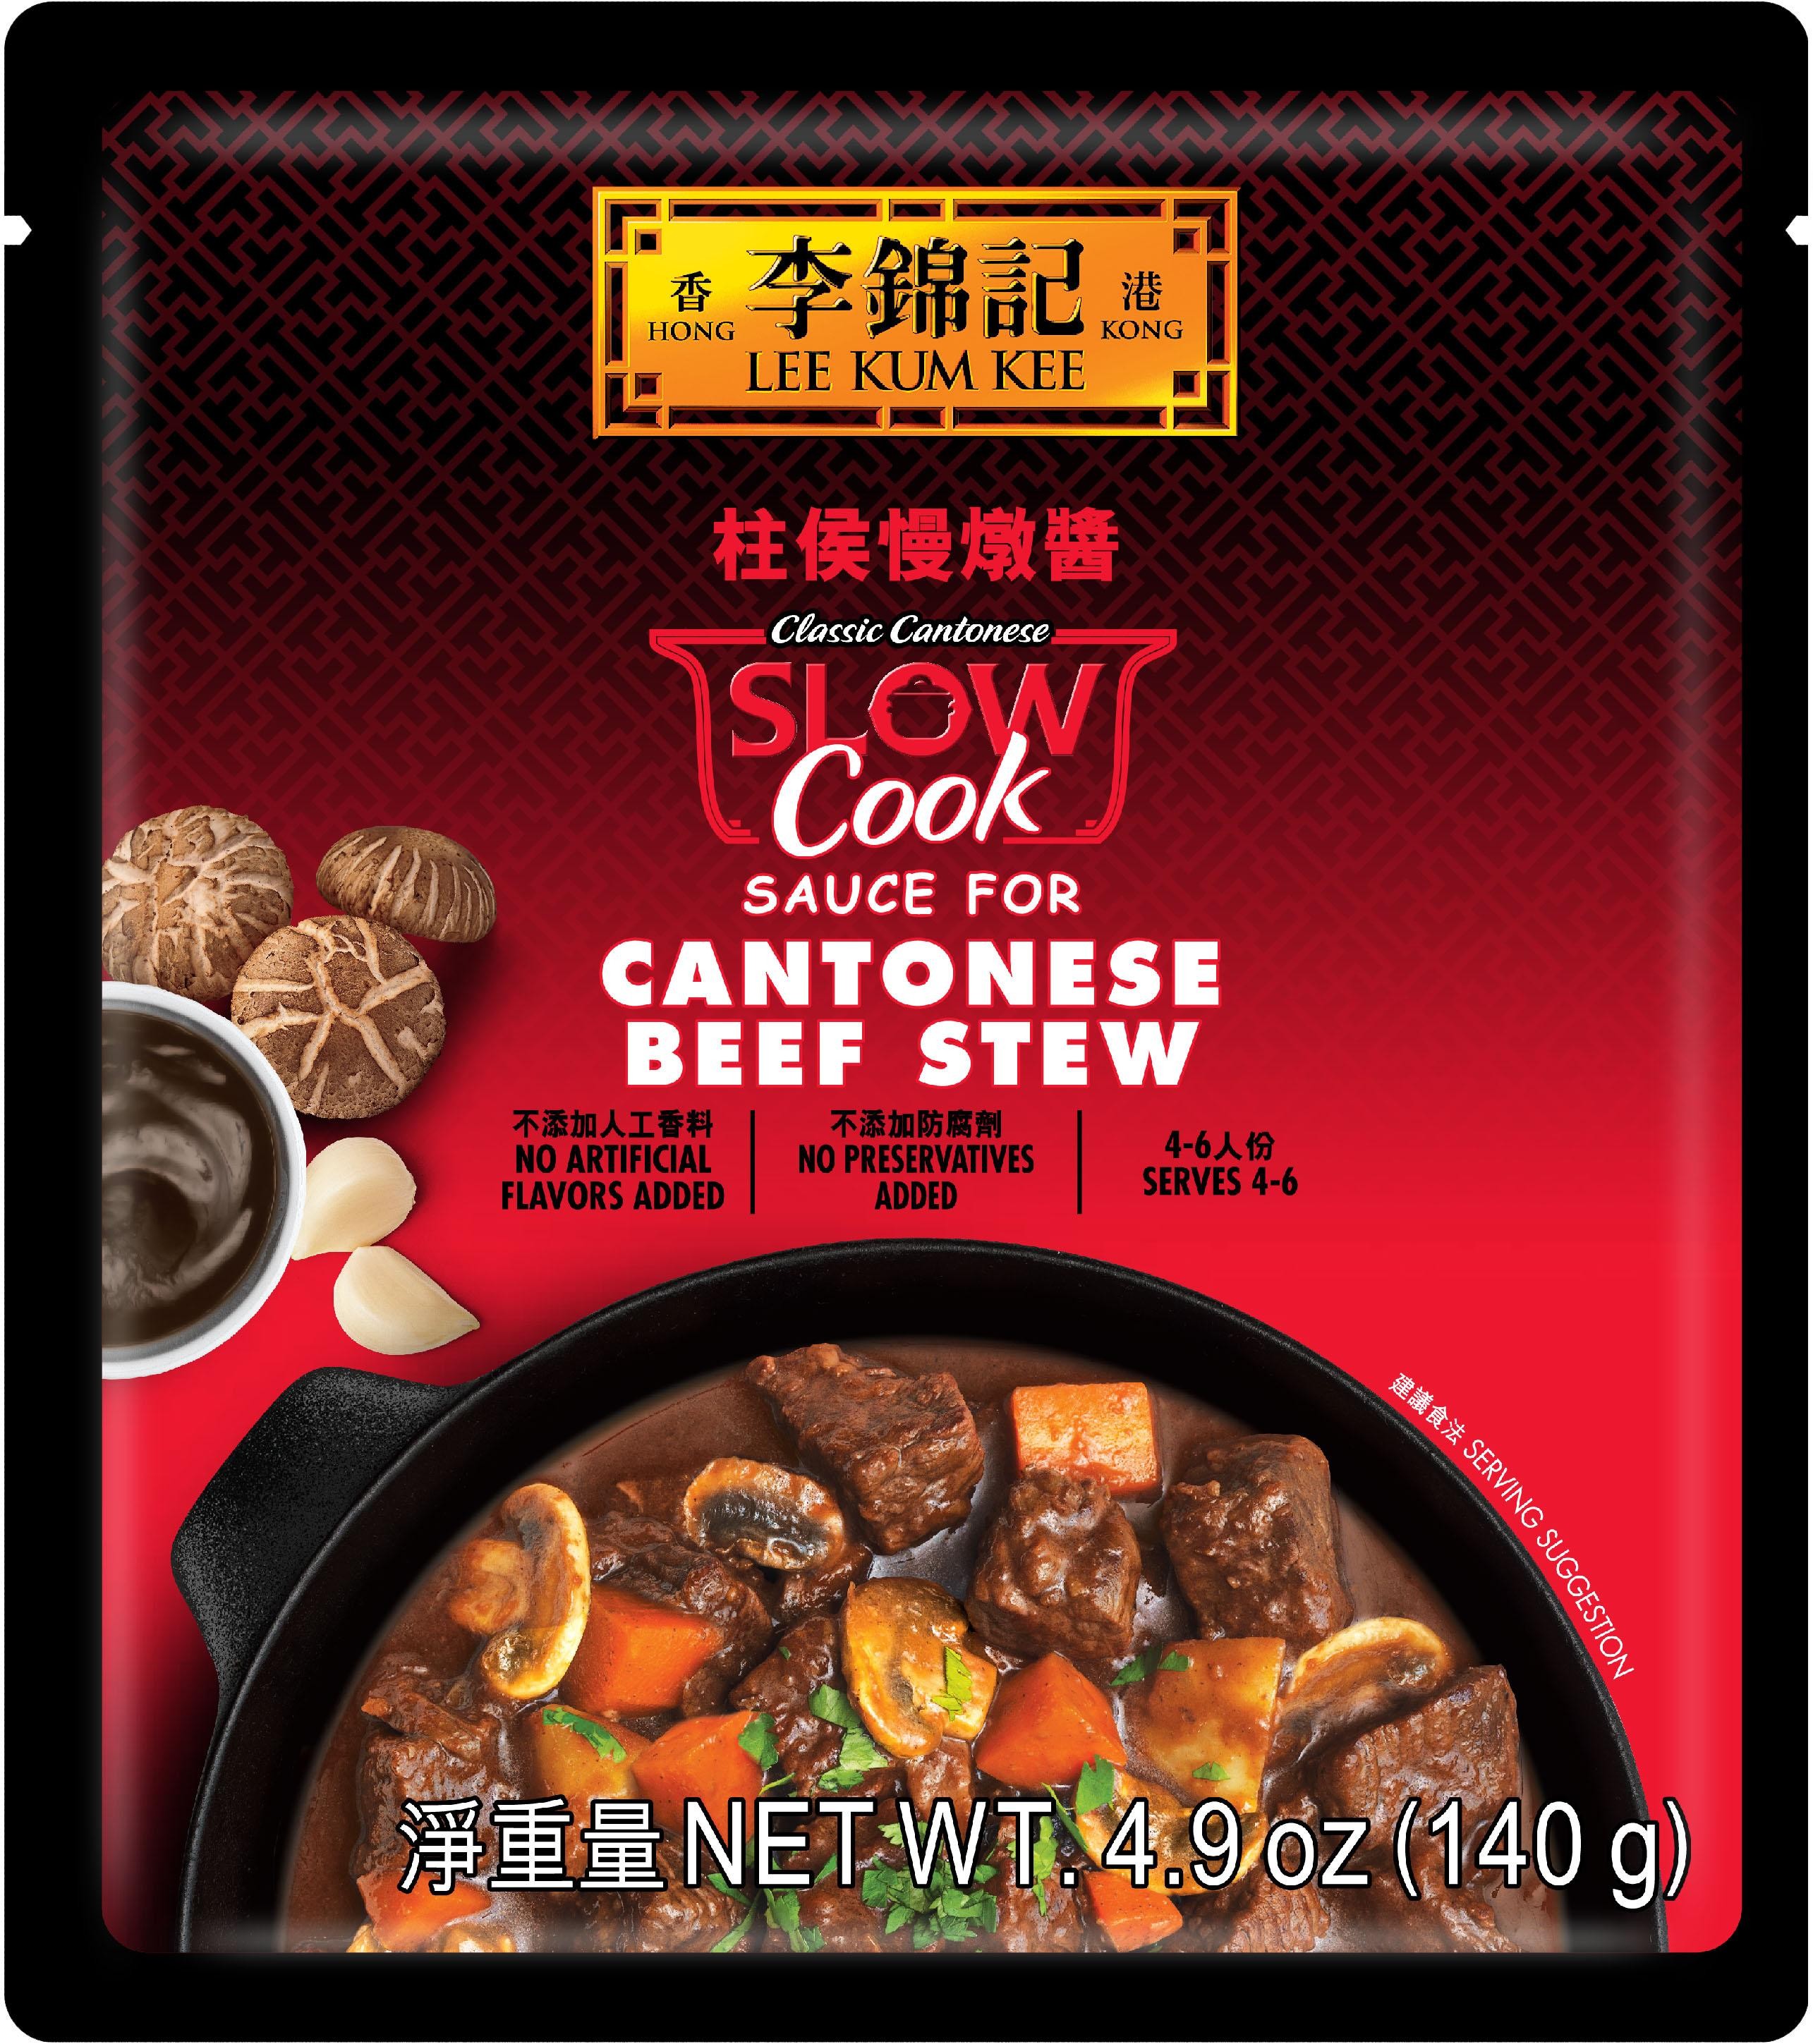 lkk-sauce-for-cantonese-style-beef-stew